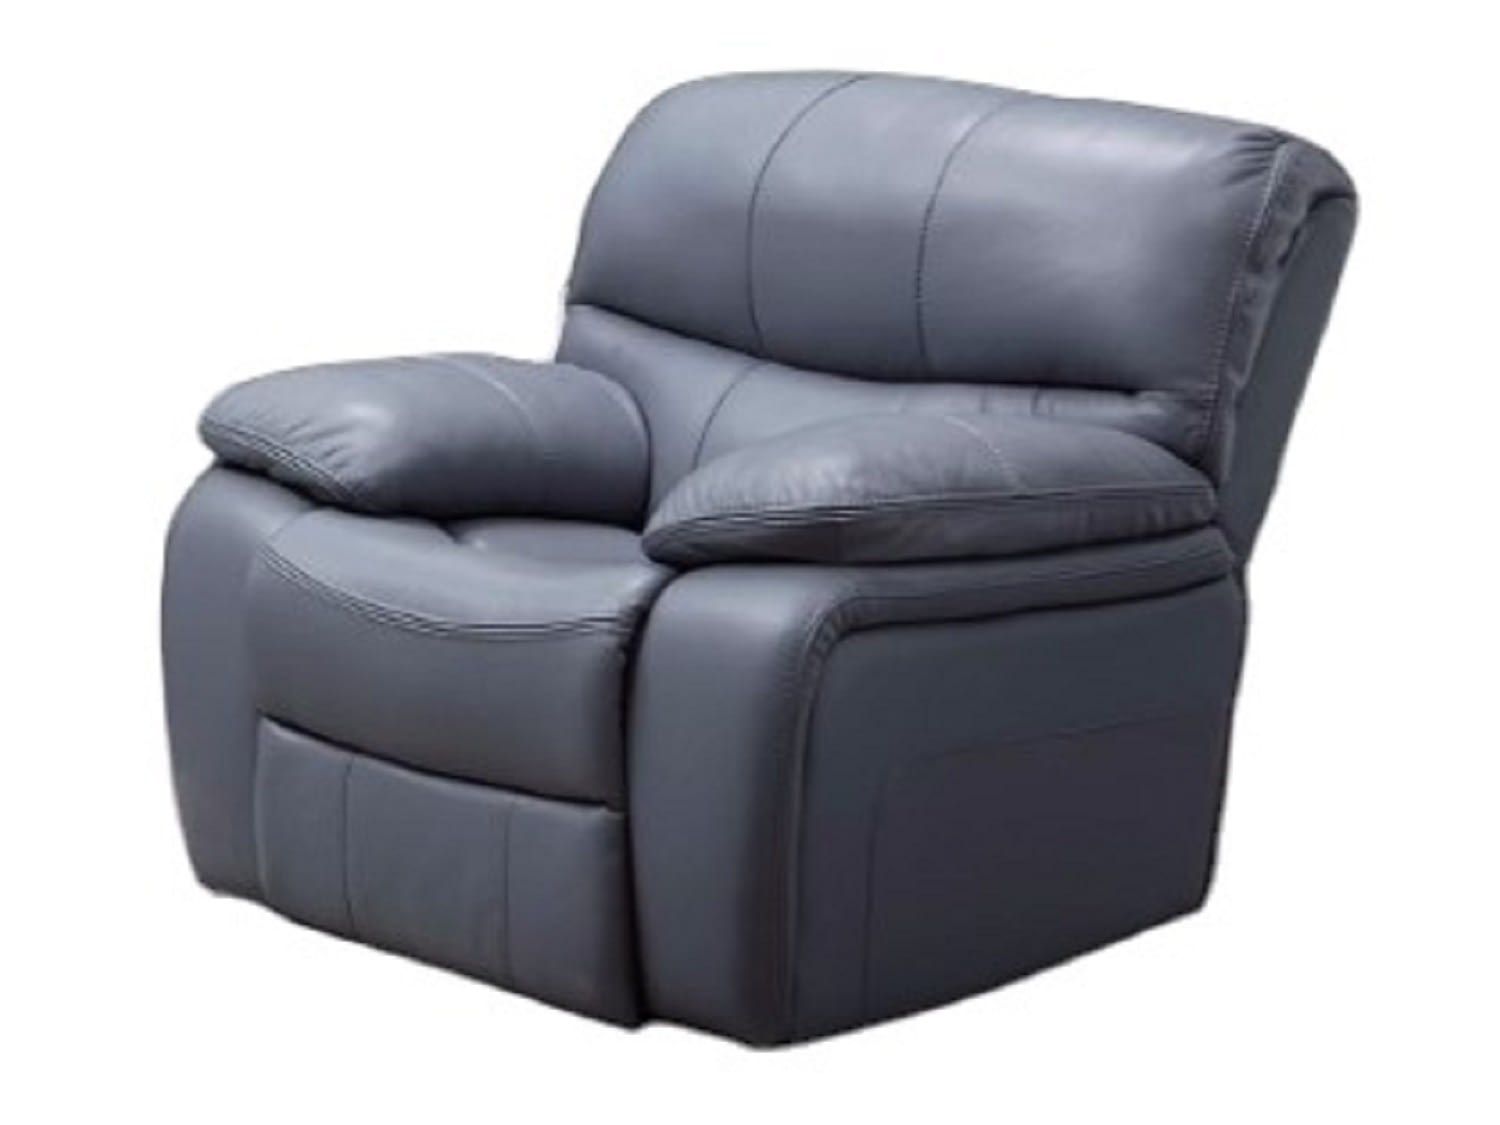 NOTUS Leather Recliner Chair Zoom